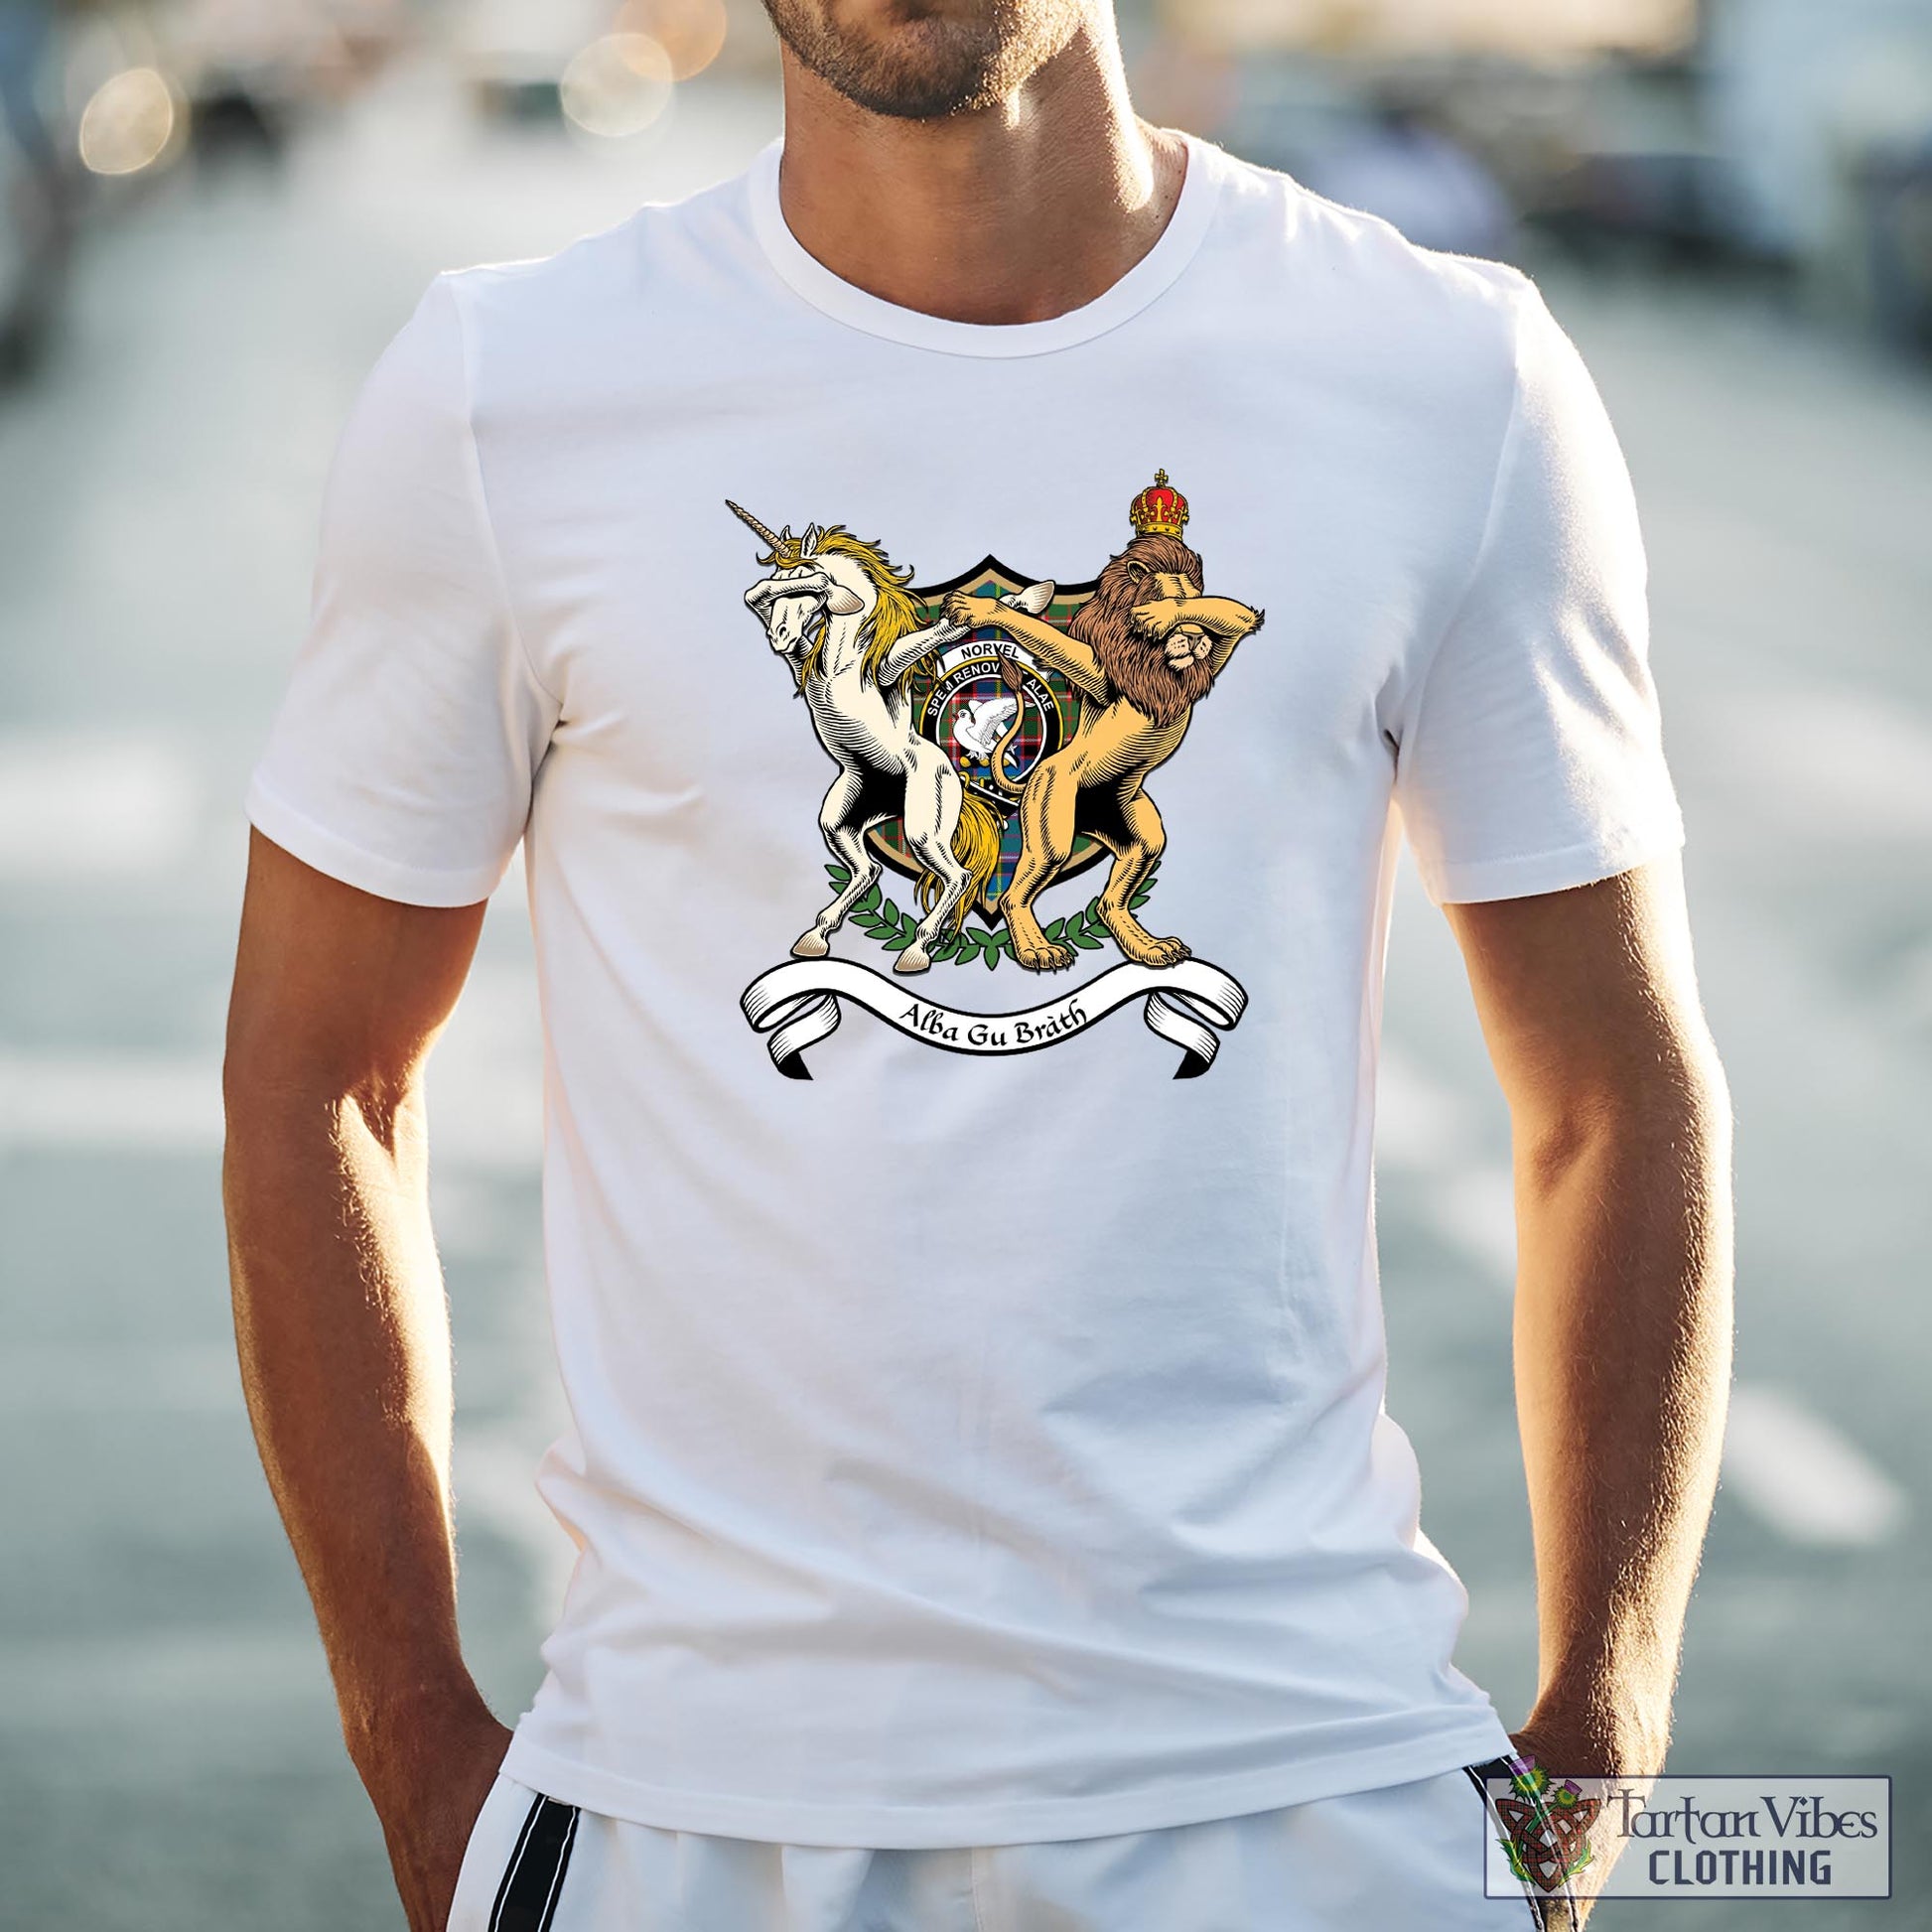 Tartan Vibes Clothing Norvel Family Crest Cotton Men's T-Shirt with Scotland Royal Coat Of Arm Funny Style